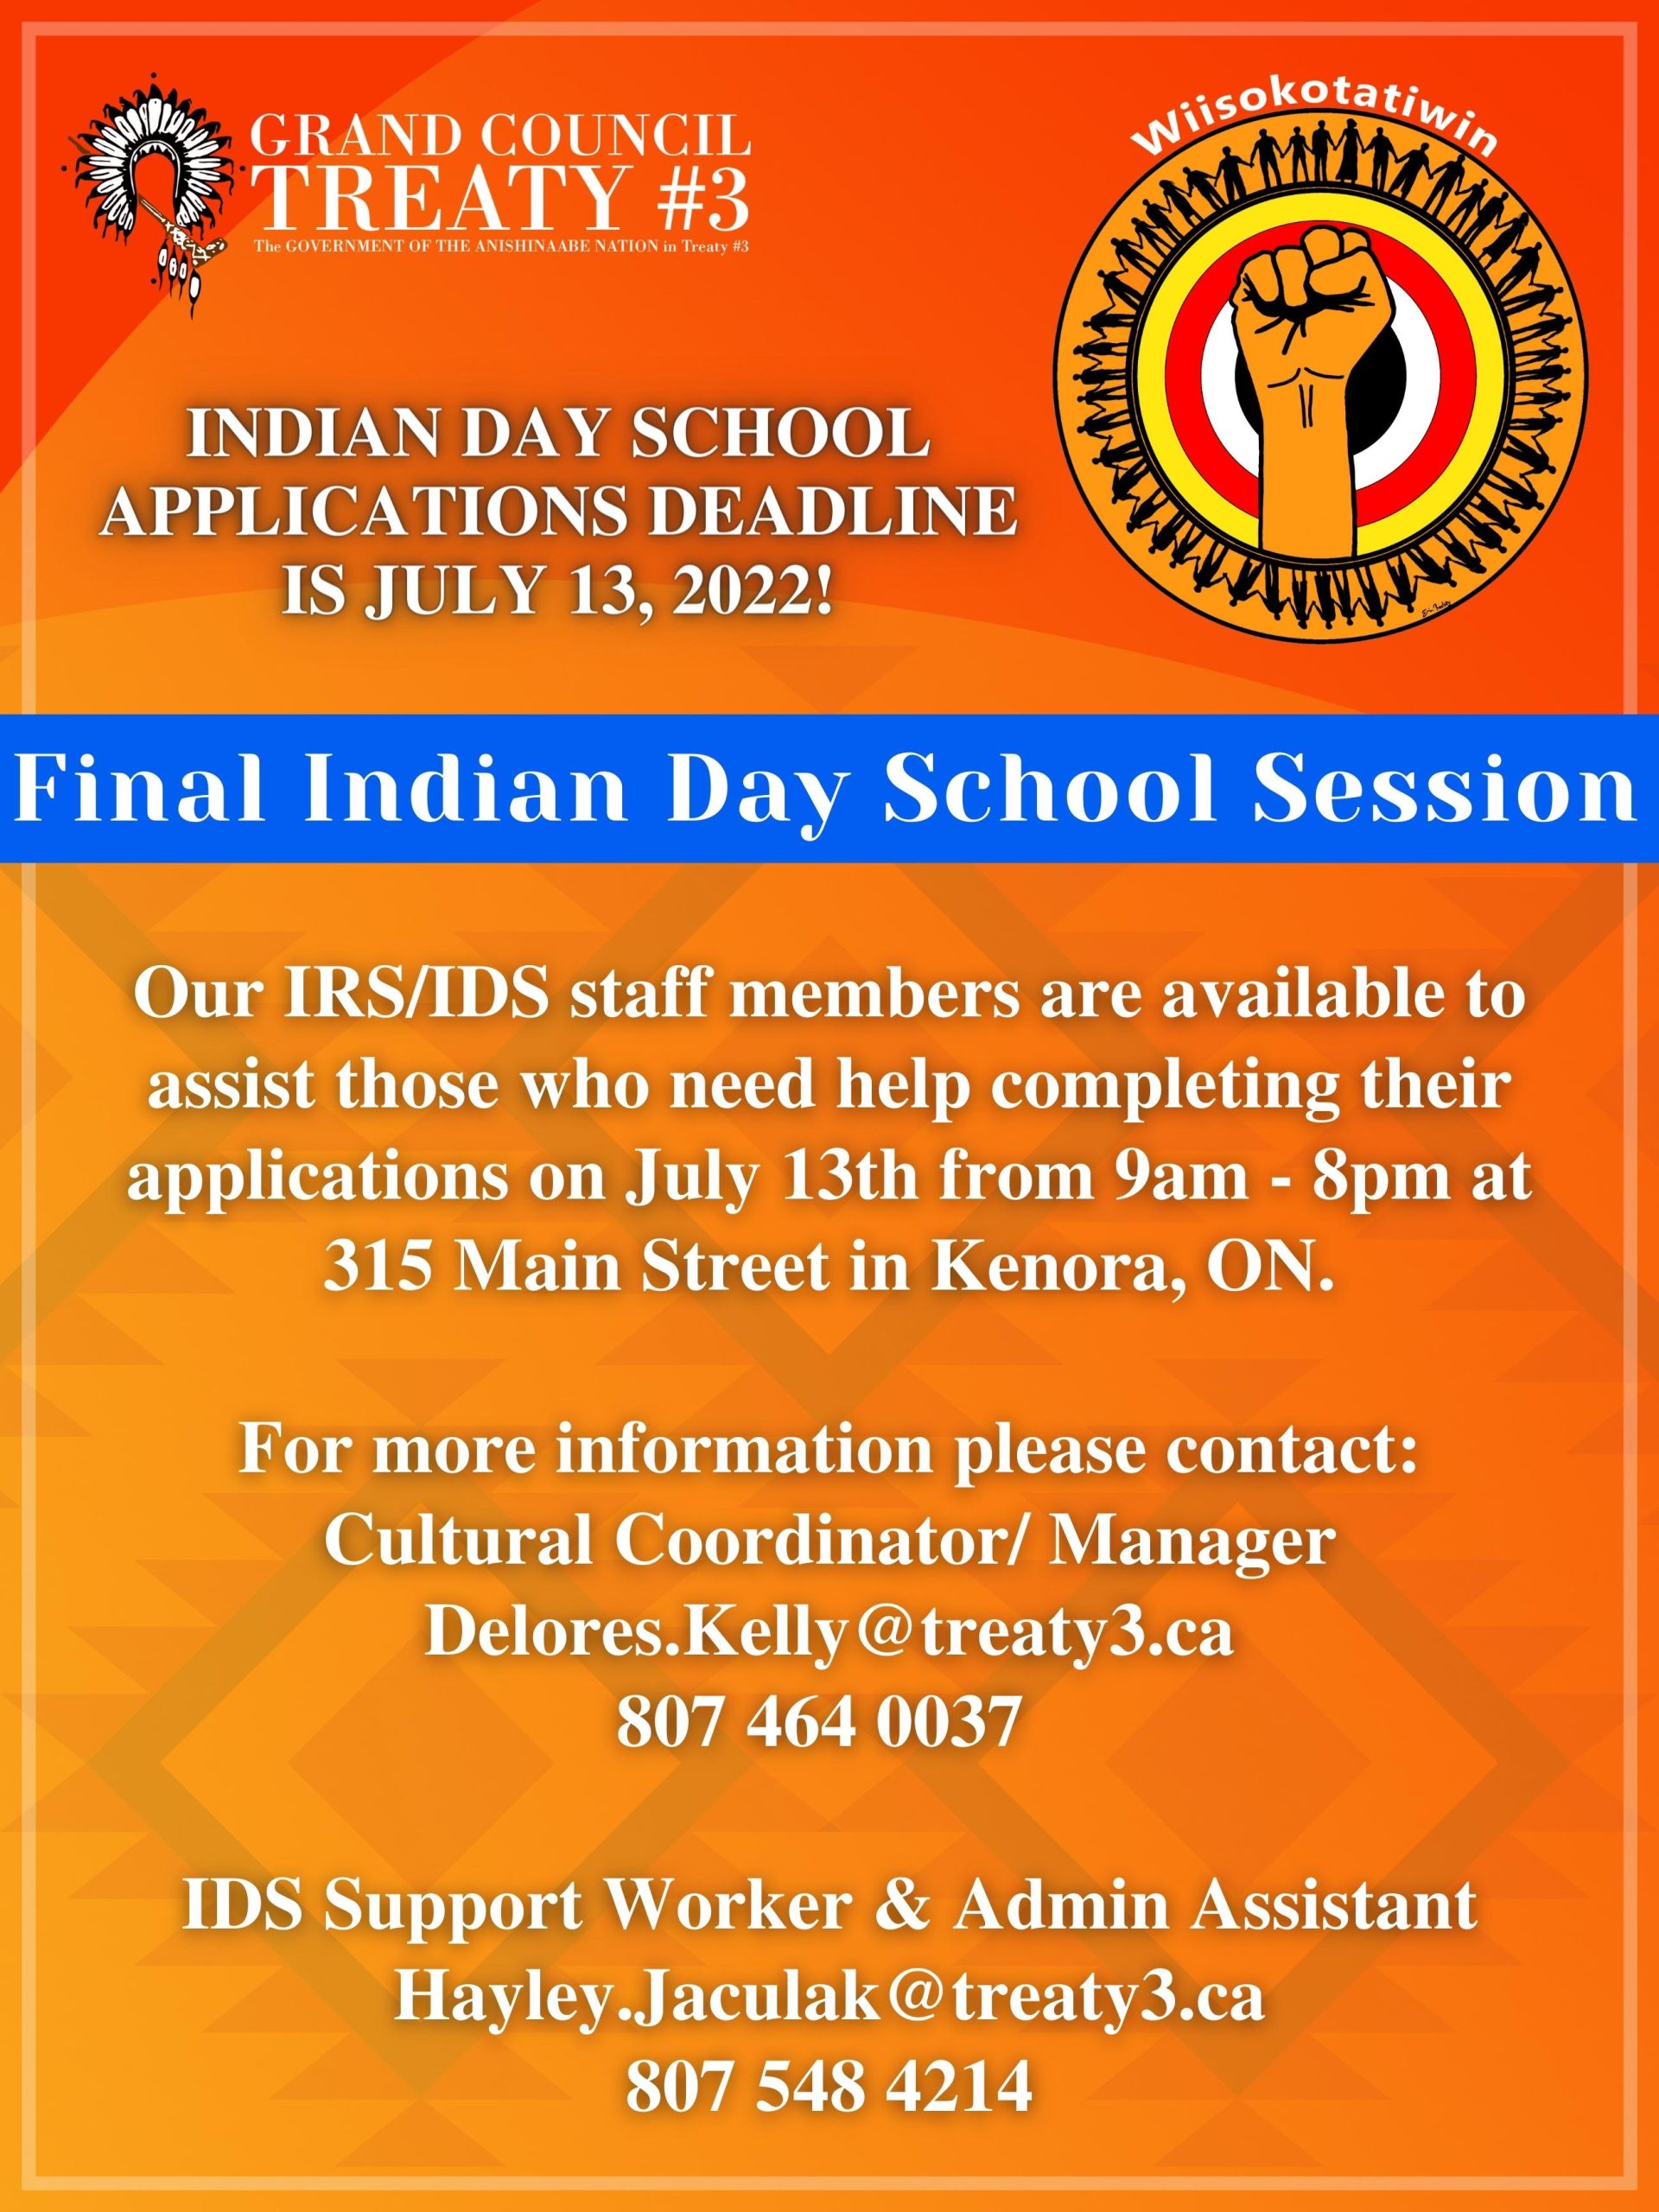 Final Indian Day School Session